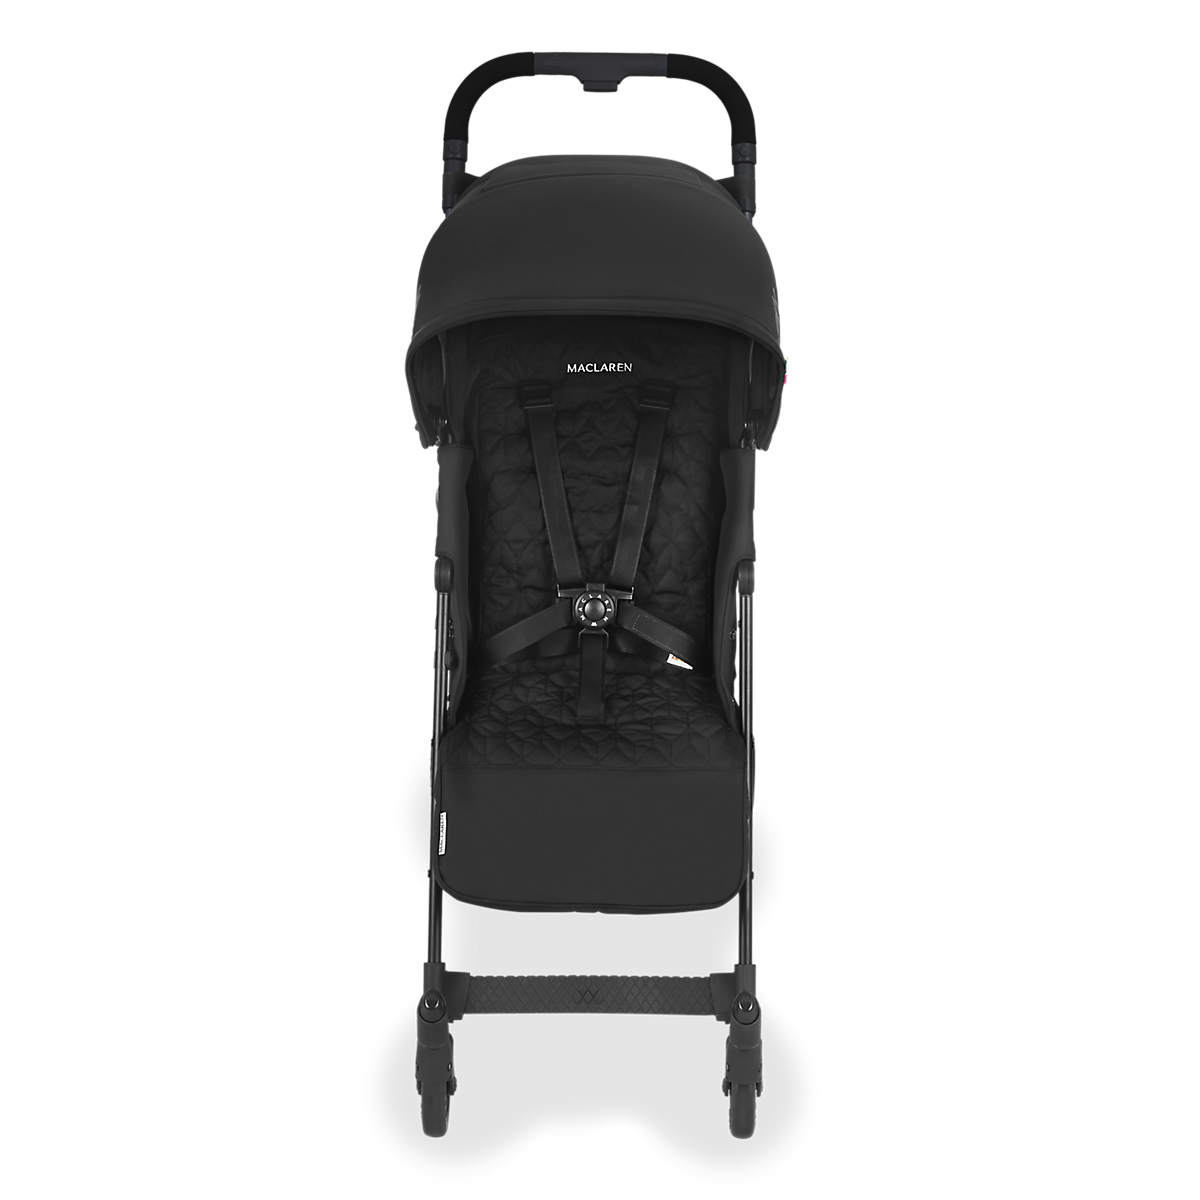 Maclaren Carrycot compatible Accessories in the box multi-position seat and 4-wheel suspension Maclaren Quest Arc Stroller- ideal for newborns up to 55lb with extendable UPF 50+/waterproof hood 